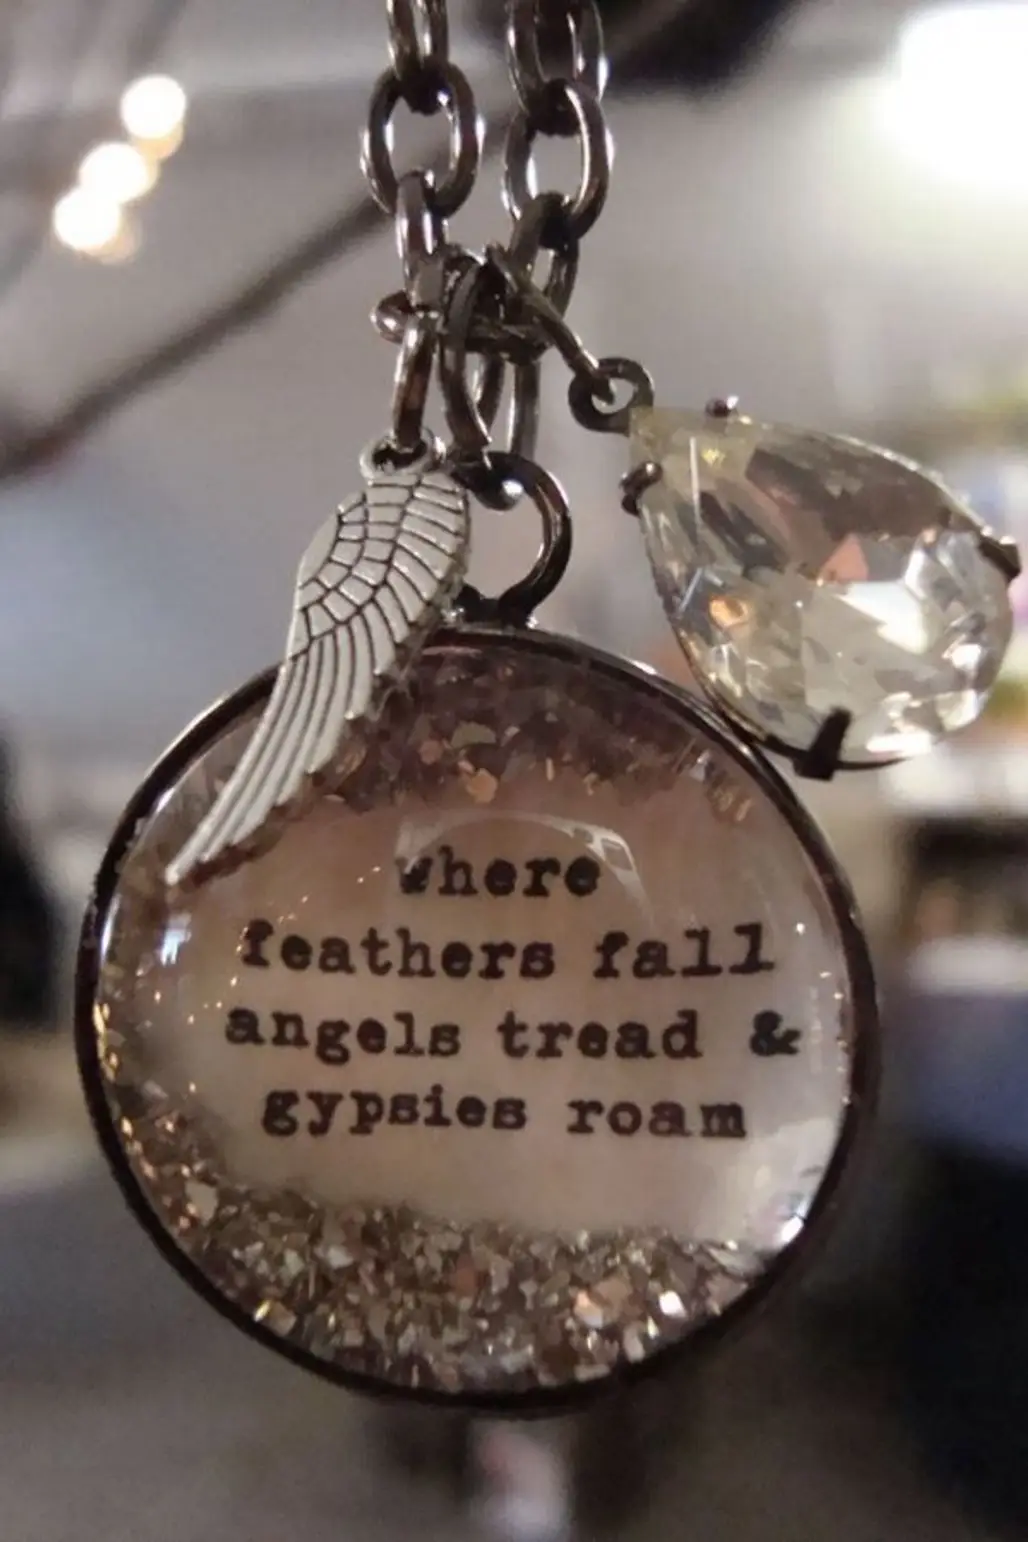 Where Feathers Fall Angels Tread Gypsies Roam is a Great Motto